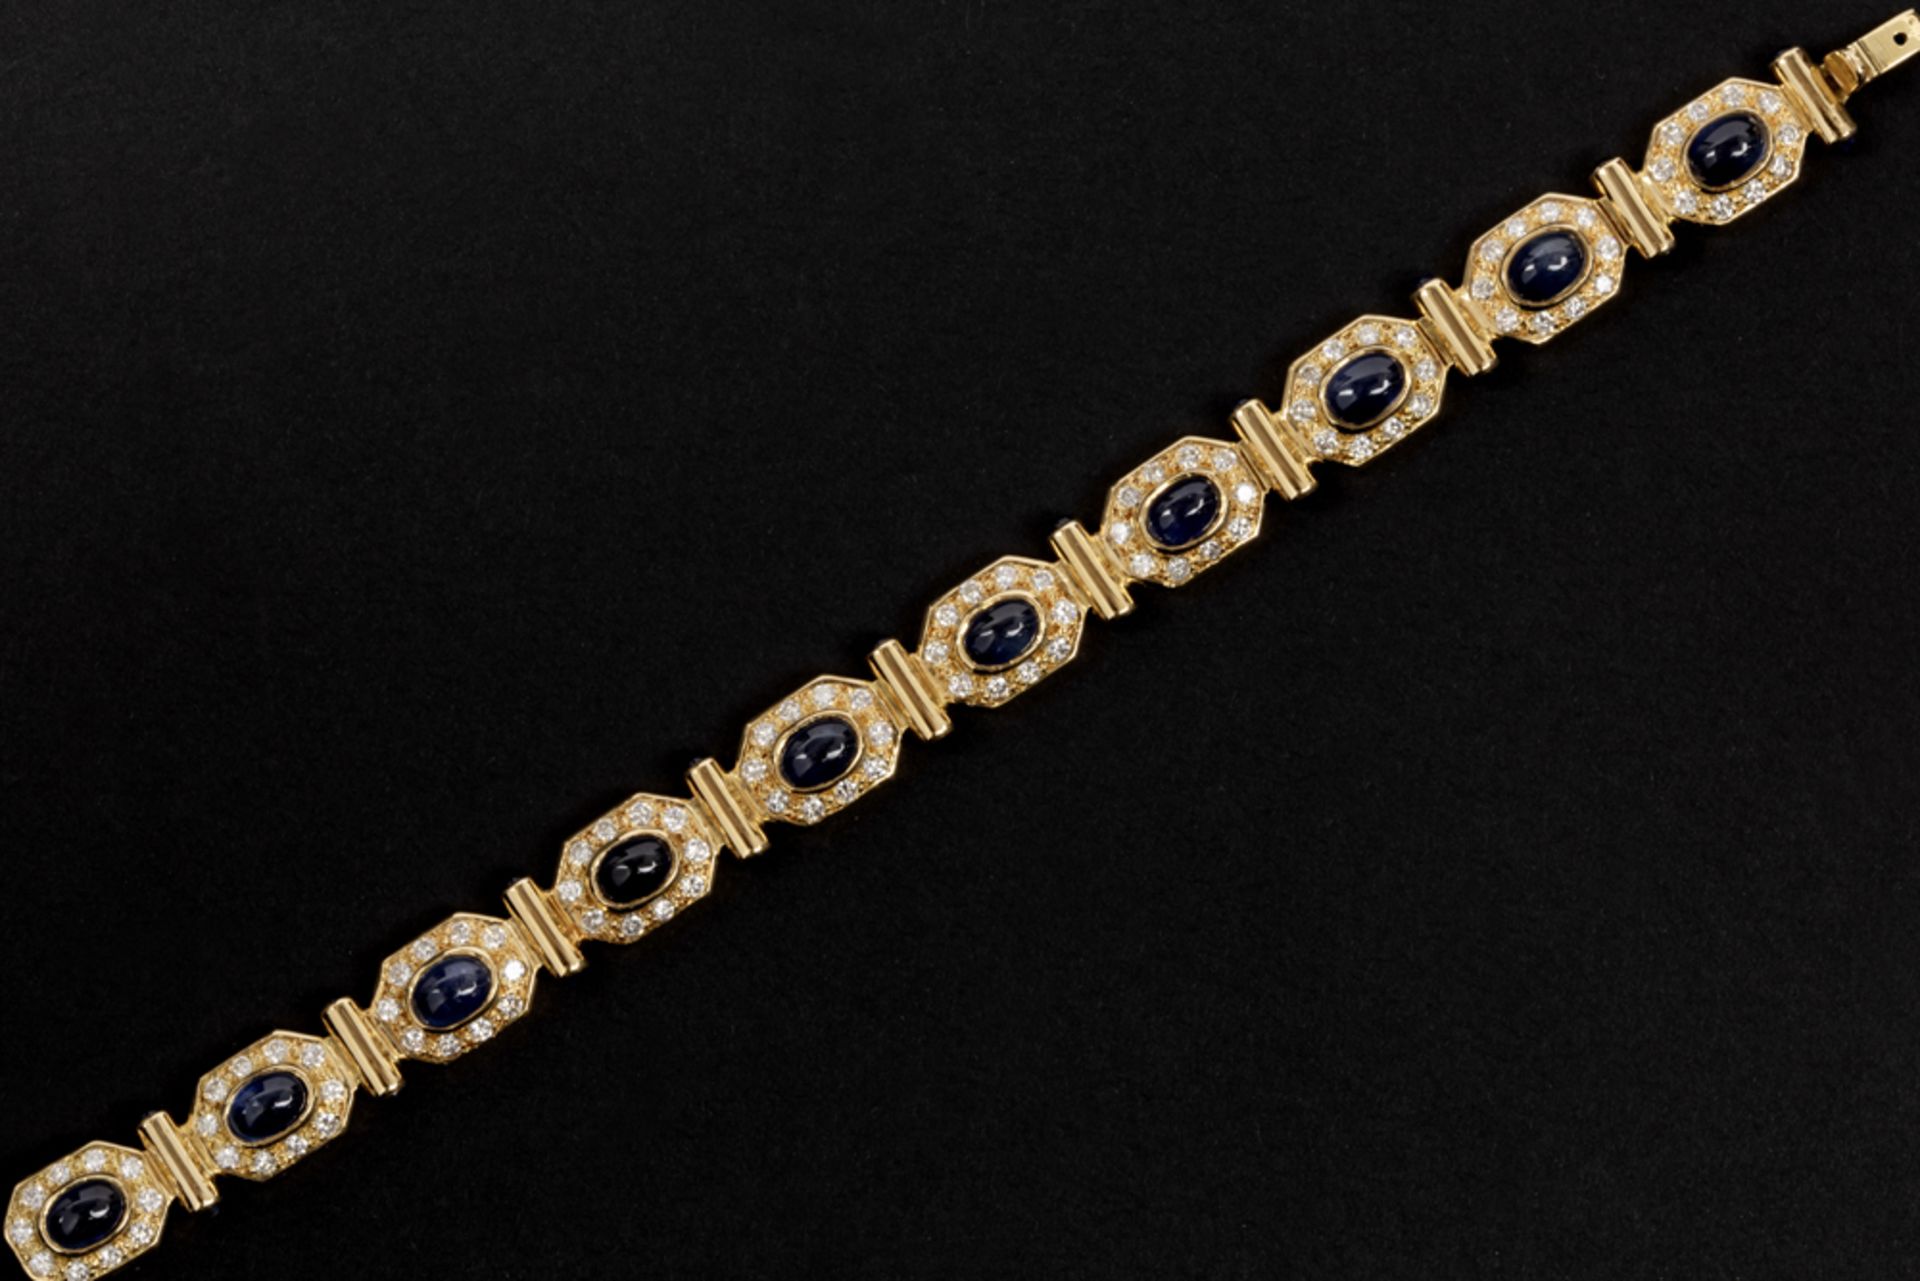 vintage Piaget style bracelet in yellow gold (18 carat) with ca 12 carat of cabochon cut sapphires